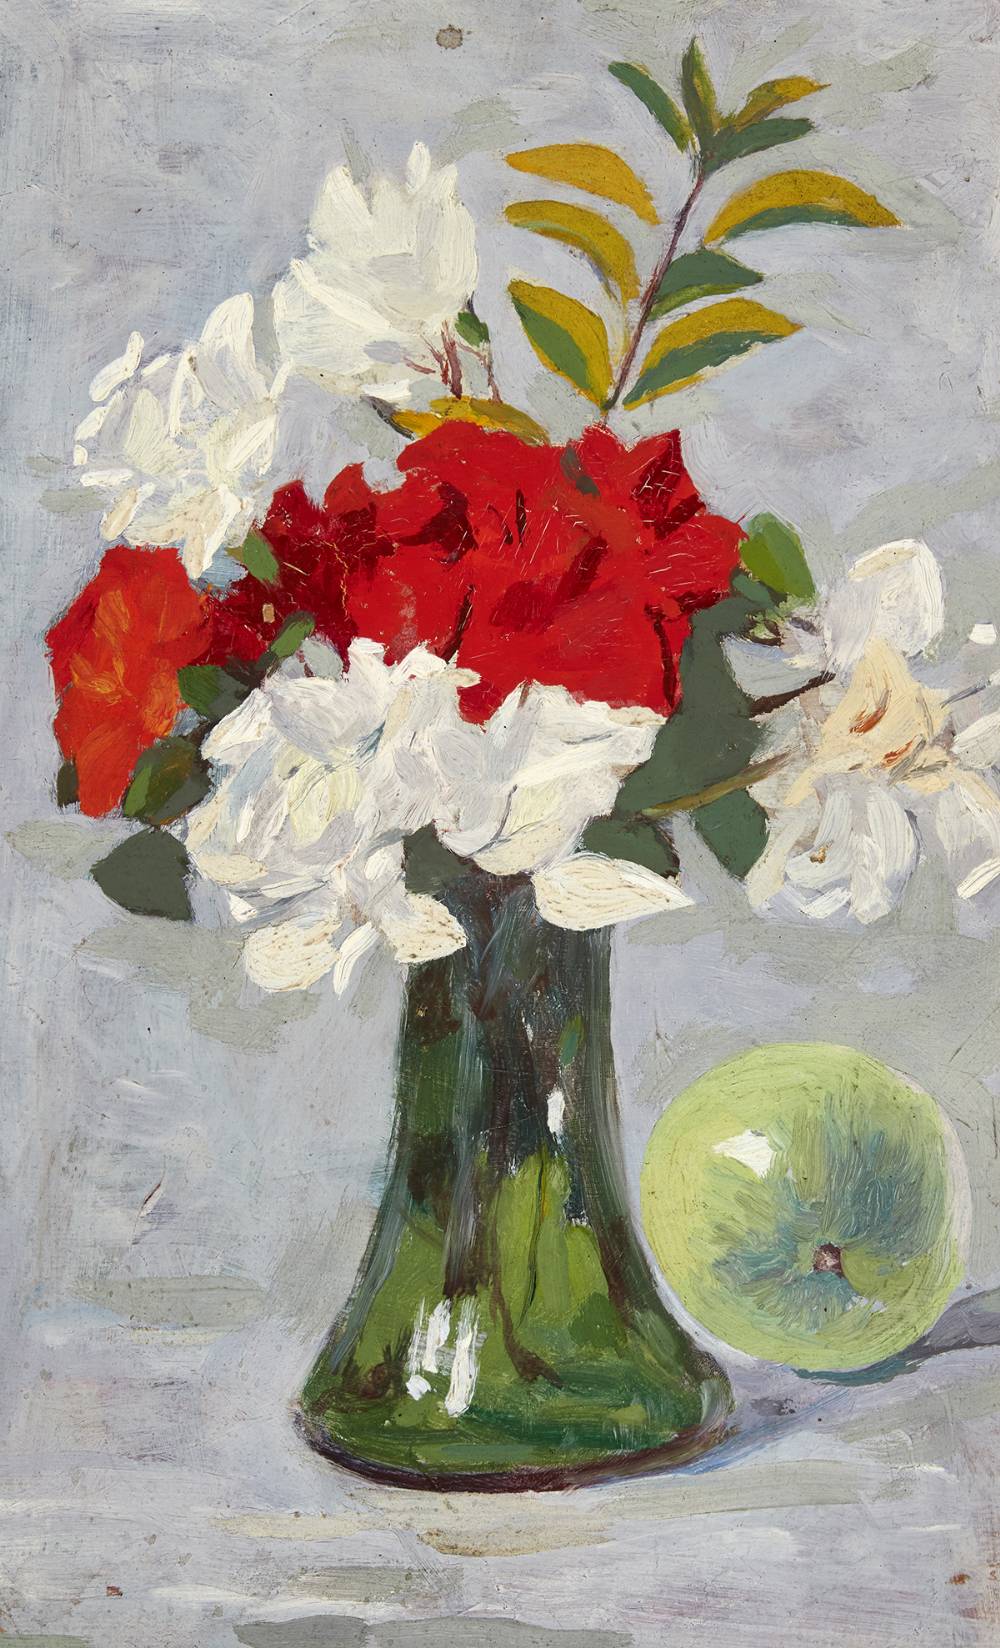 ORANGE AND WHITE FLOWERS IN A GREEN, BELL-BOTTOMED VASE by Michael Healy sold for 380 at Whyte's Auctions